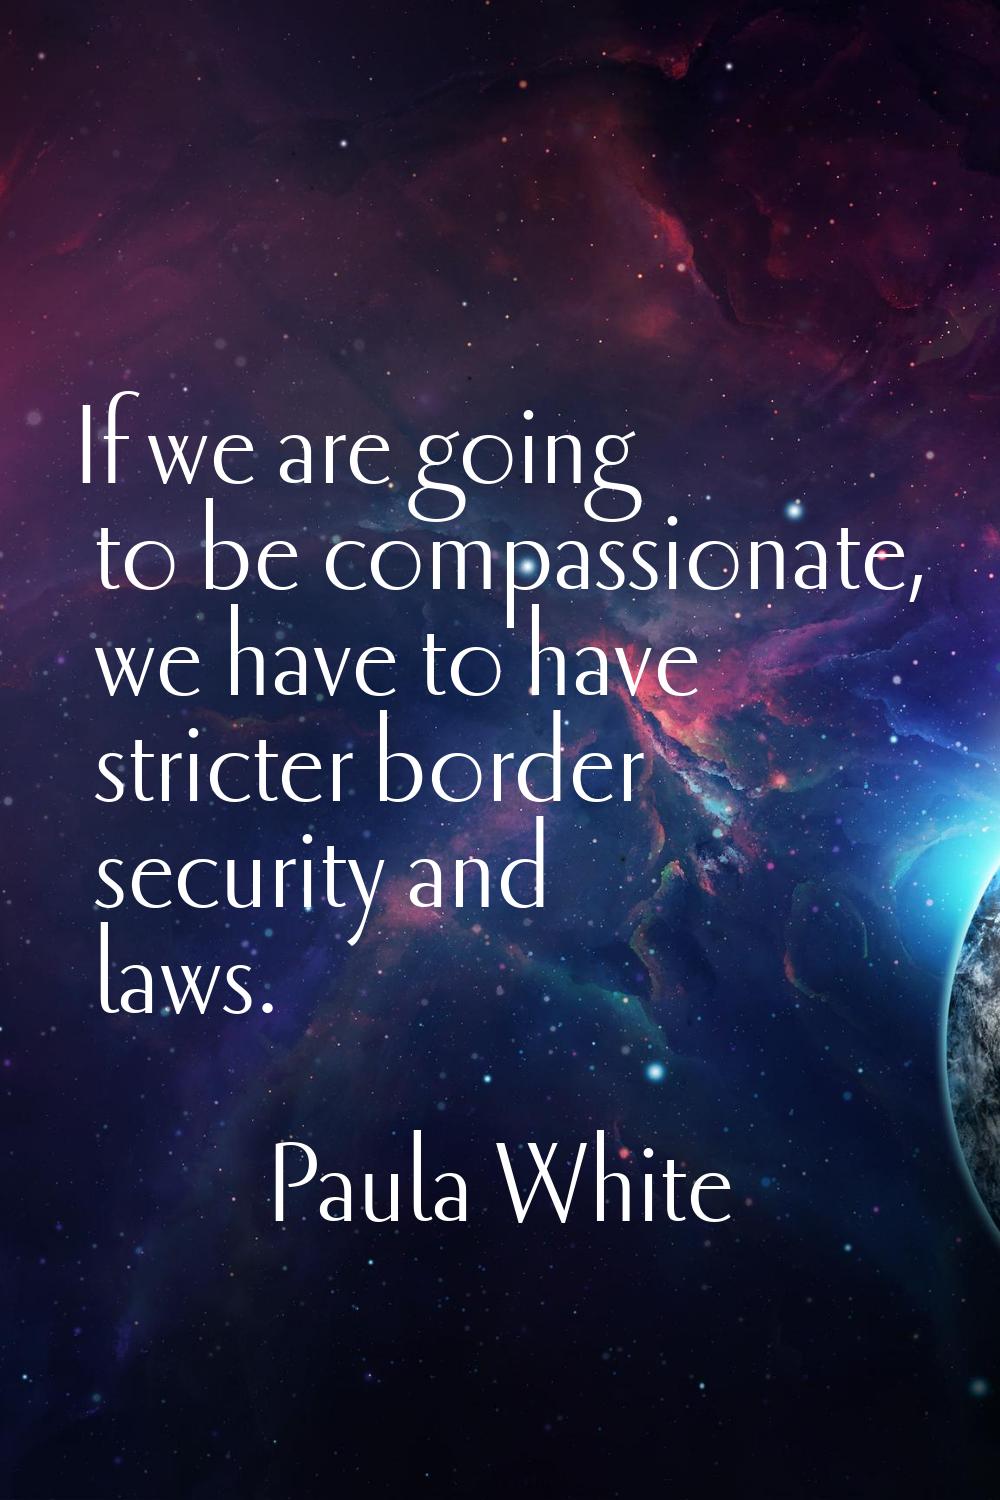 If we are going to be compassionate, we have to have stricter border security and laws.